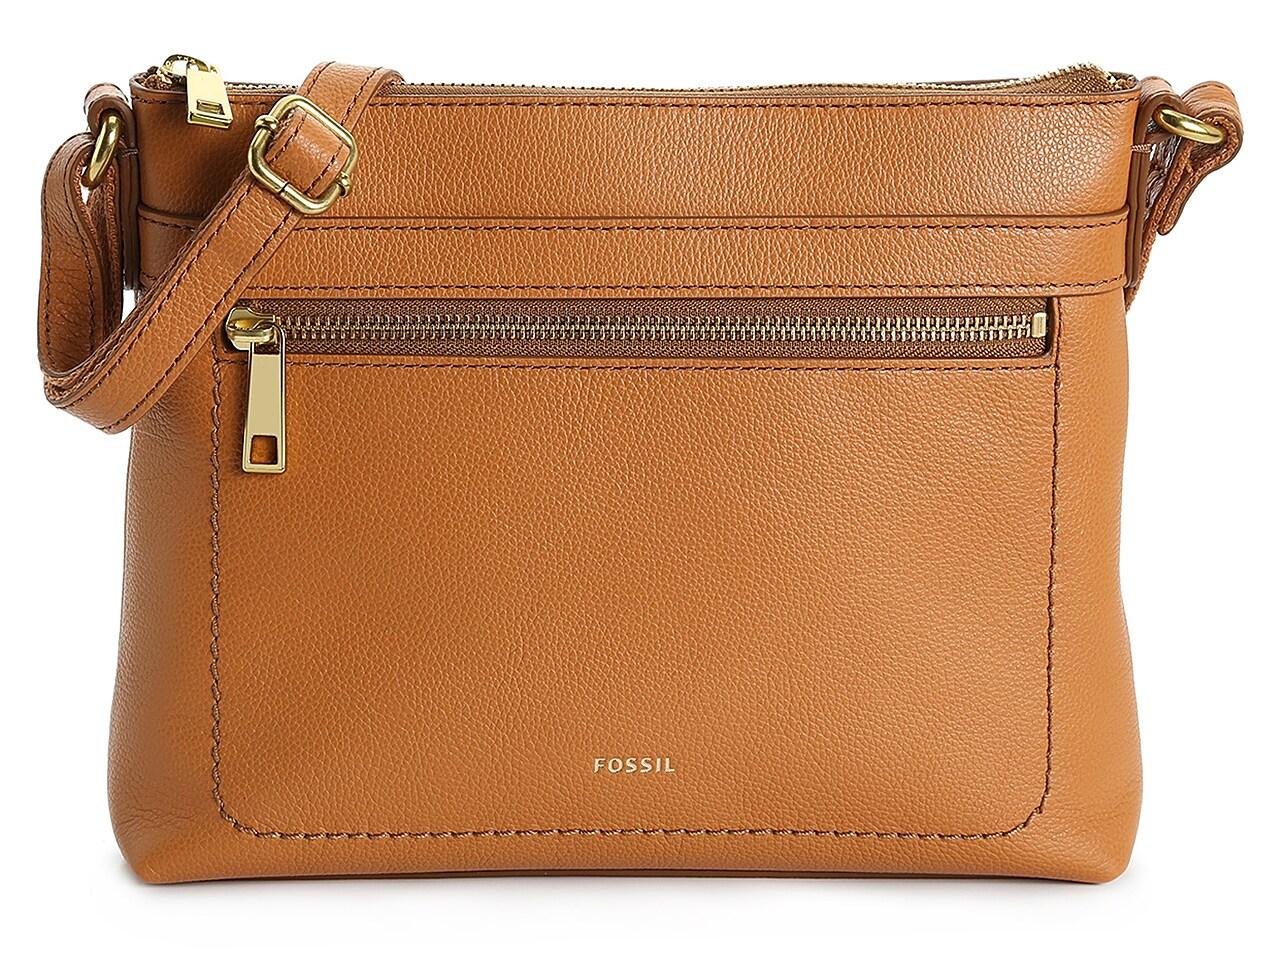 Fossil Evie Leather Crossbody Bag in Brown | Lyst